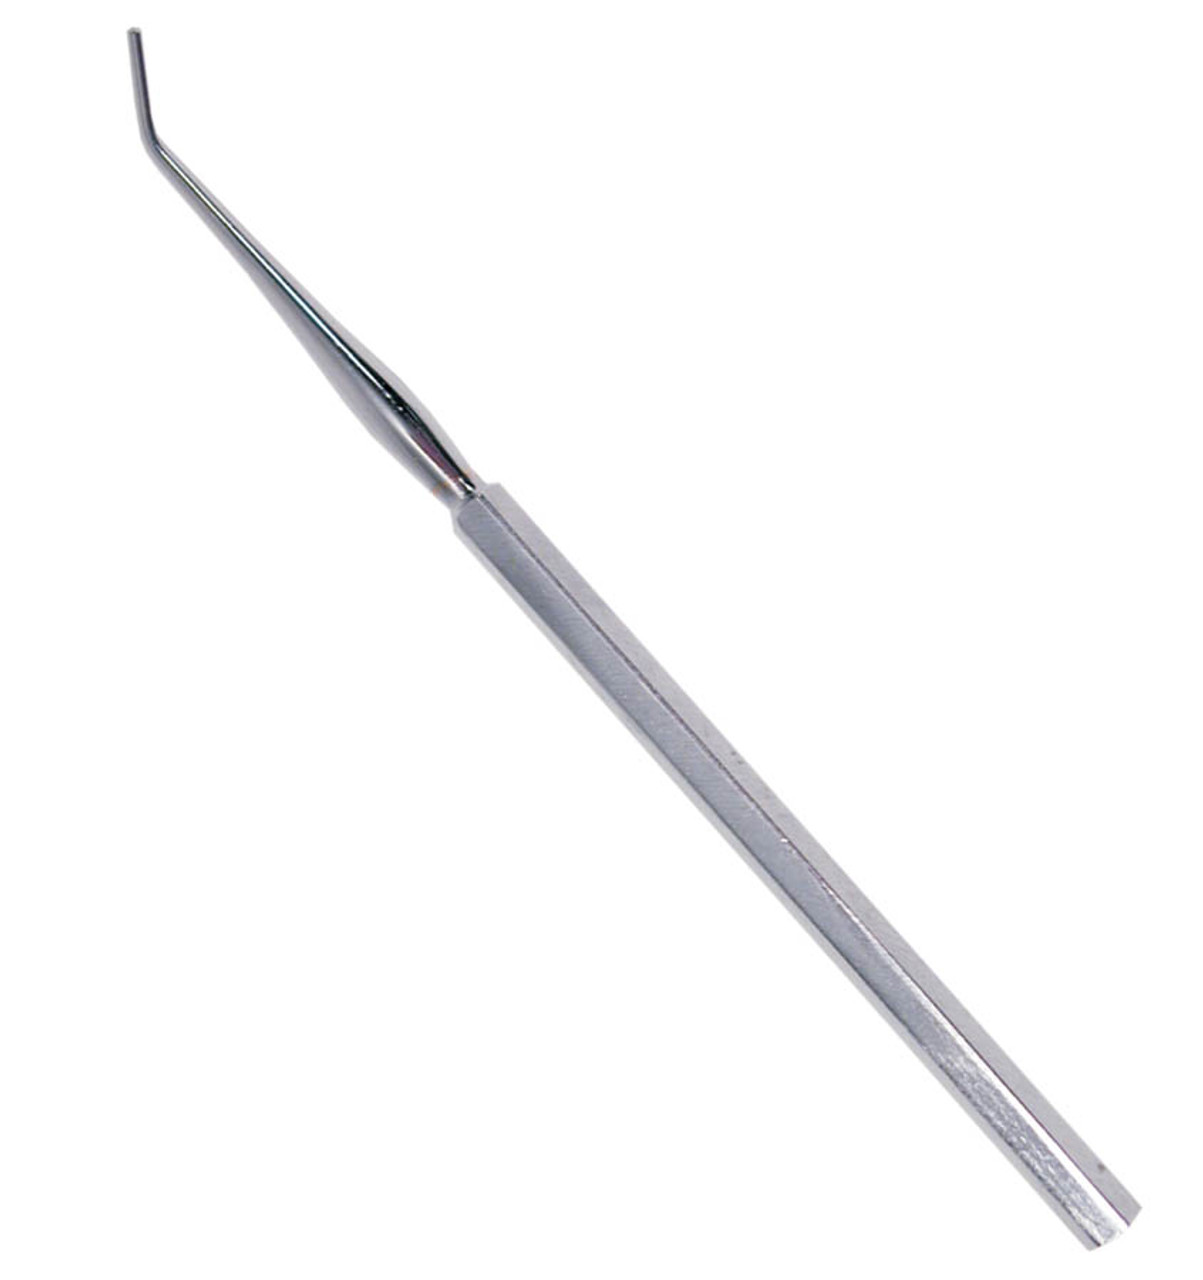 Probe dissection tool